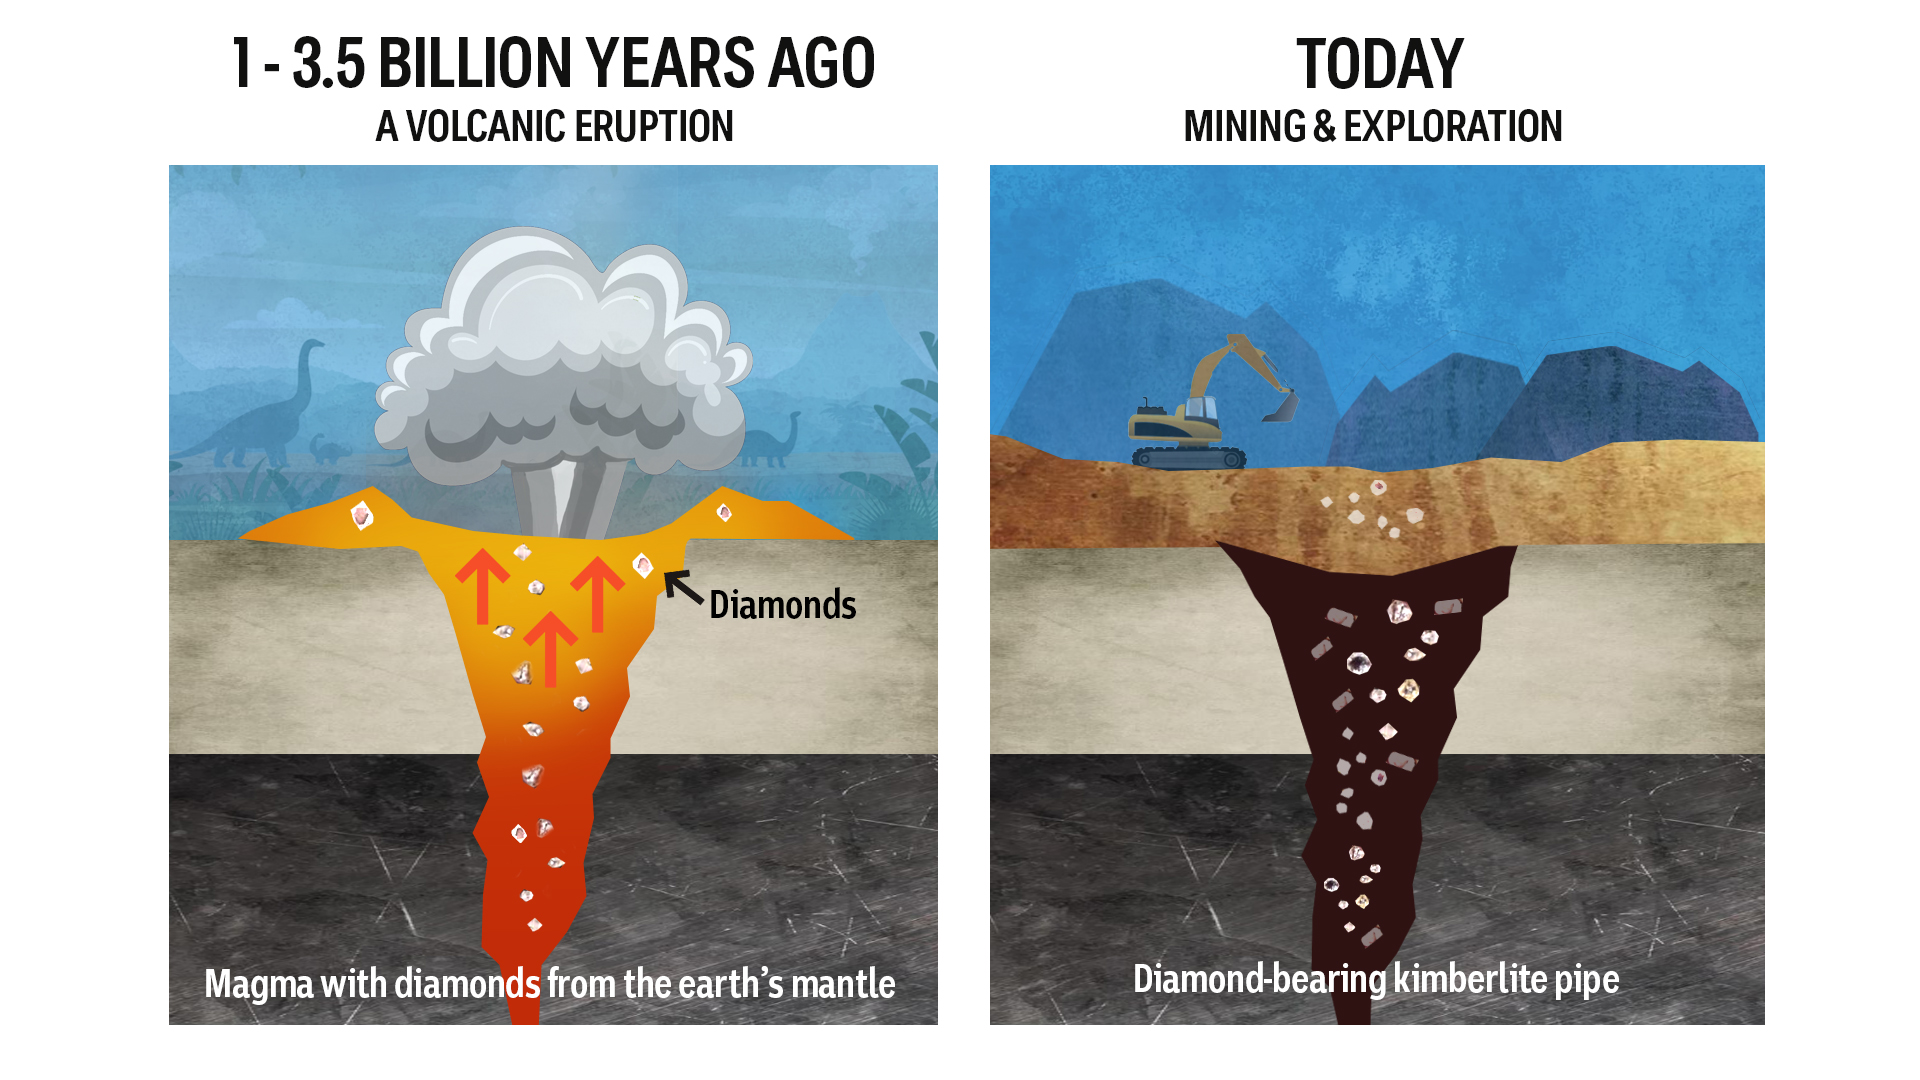 A diagram showing a volcanic eruption long ago and diamonds in the ground underneath today.